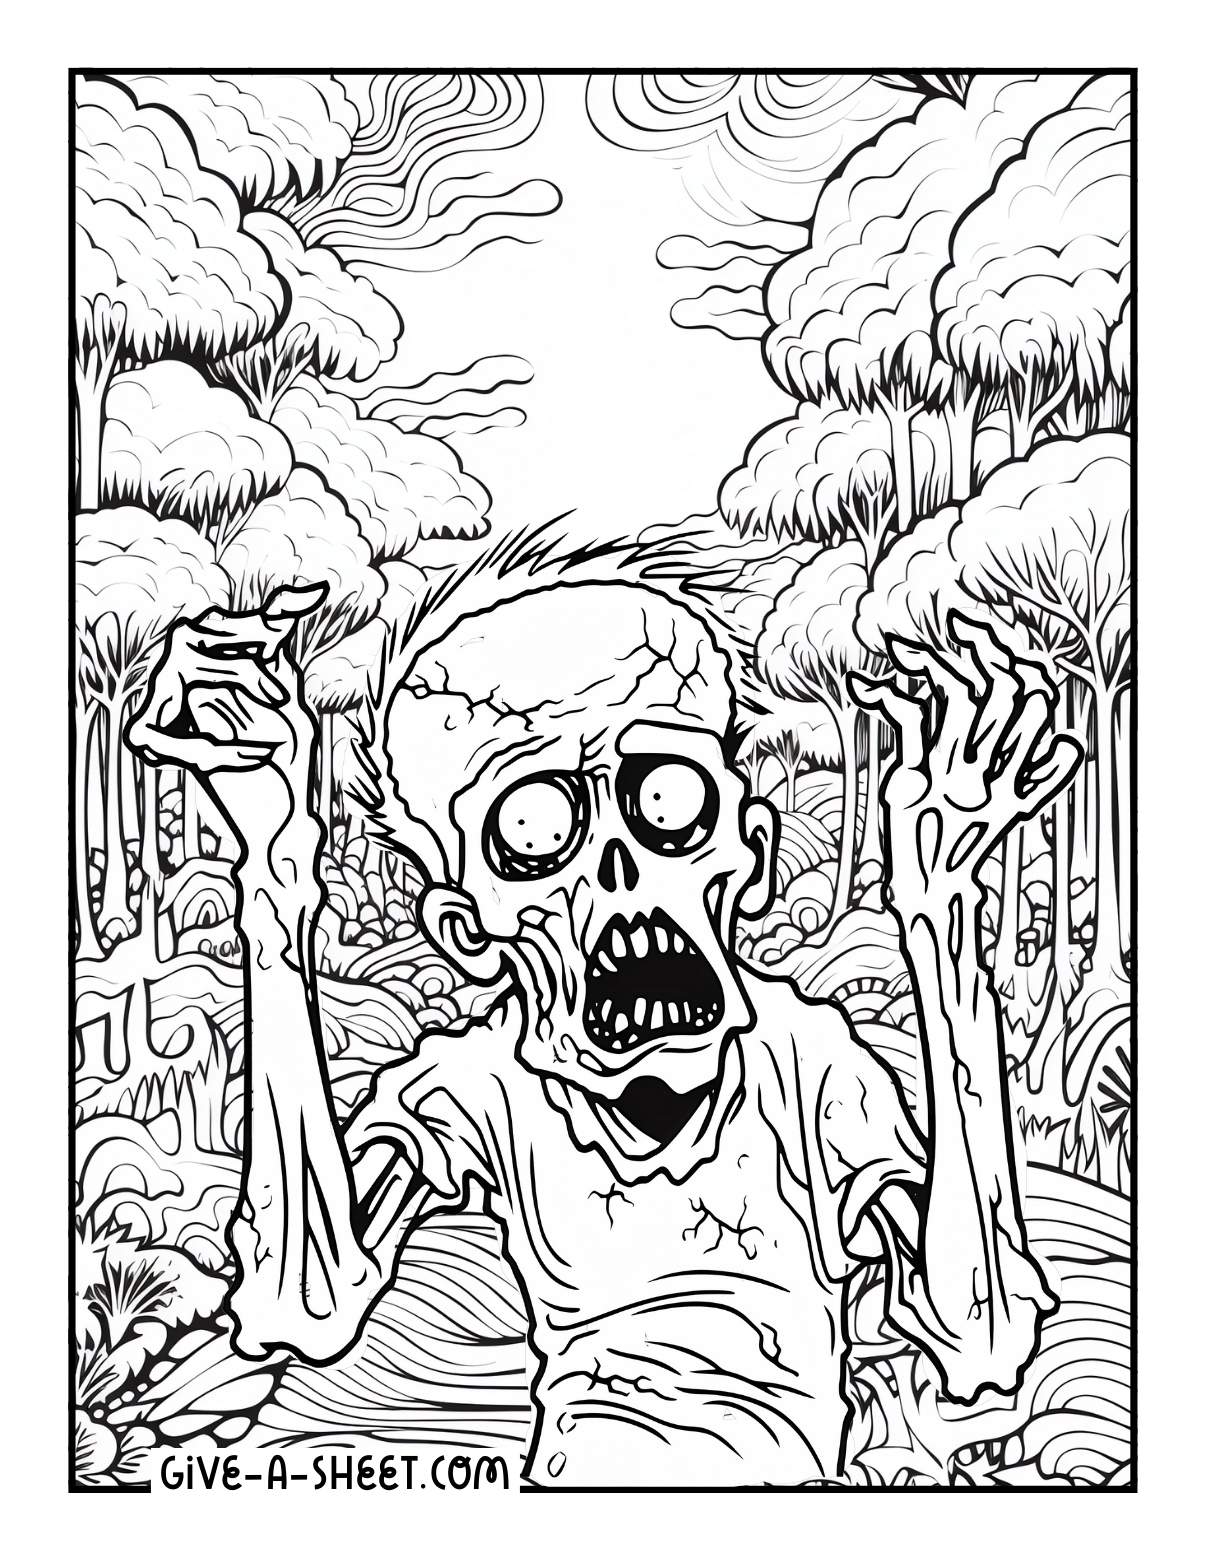 Crazy dave zombie coloring page for adults.